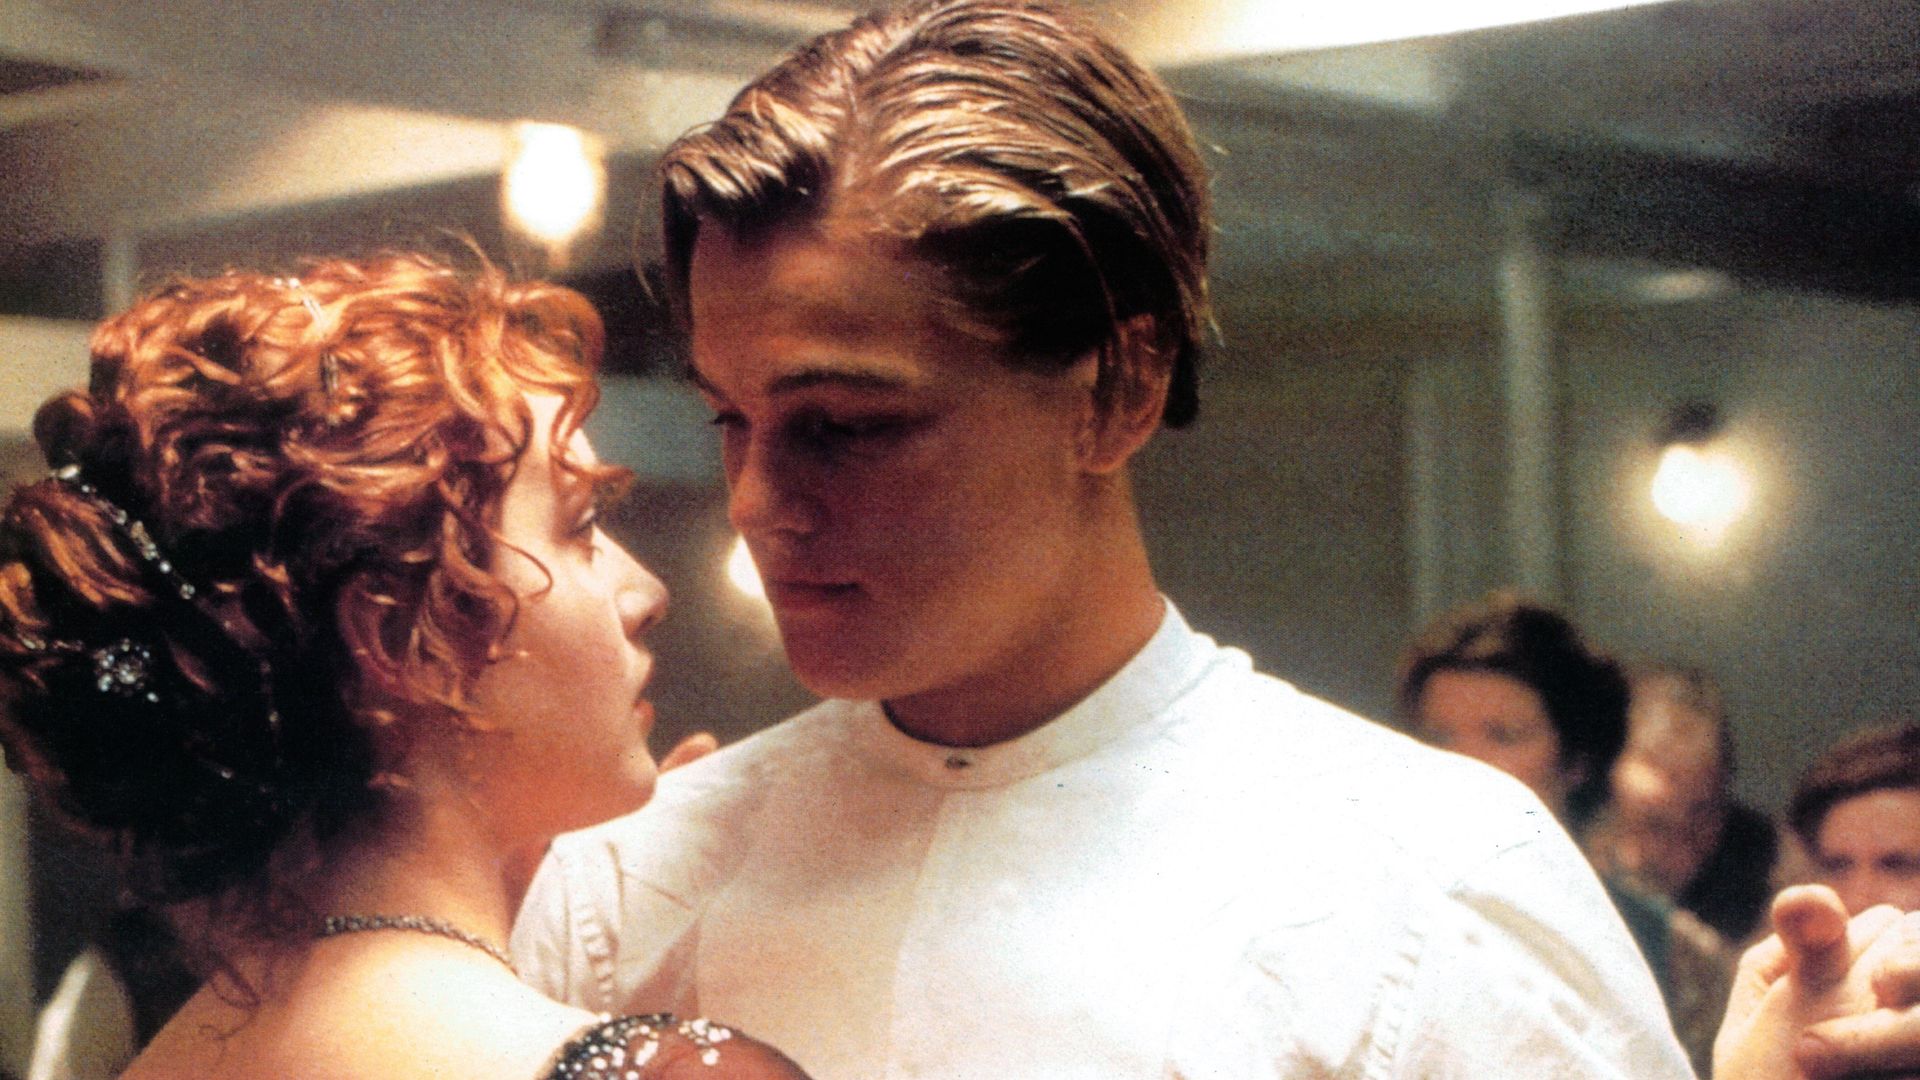 Kate Winslet and Leonardo DiCaprio in 1997's "Titanic." (Photo by 20th Century-Fox/Getty Images)